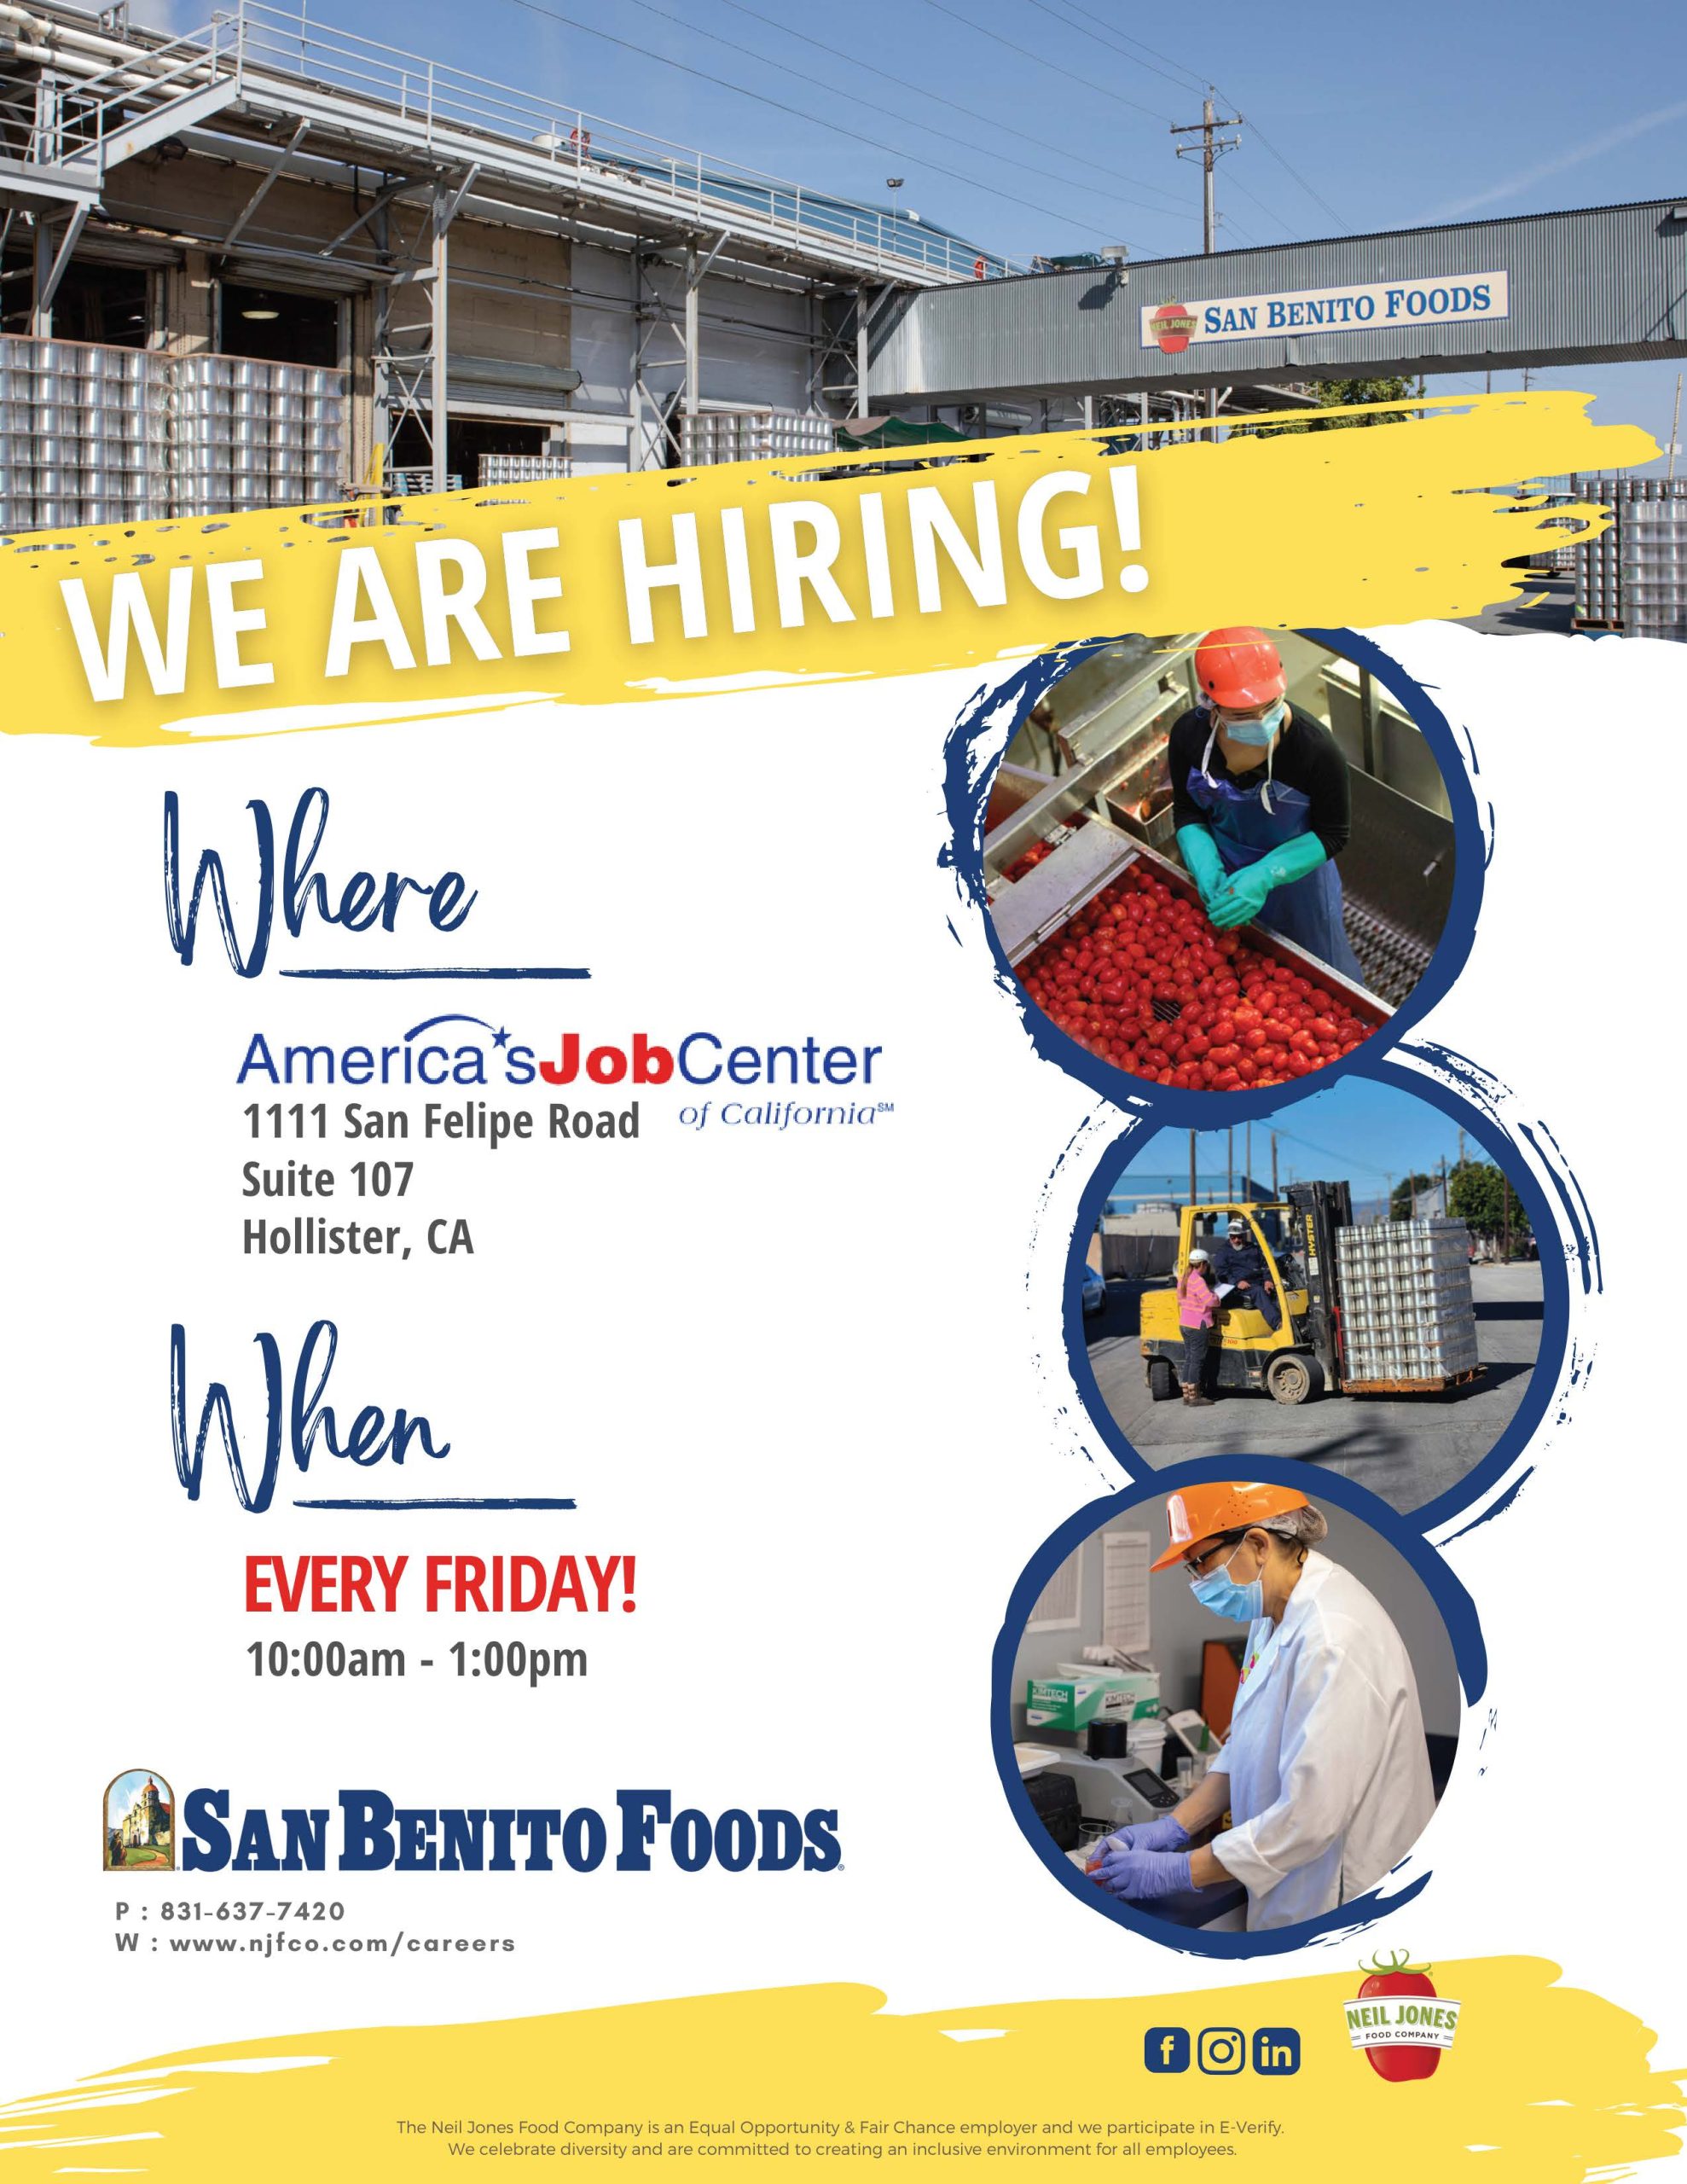 San Benito Foods Onsite Hiring Event